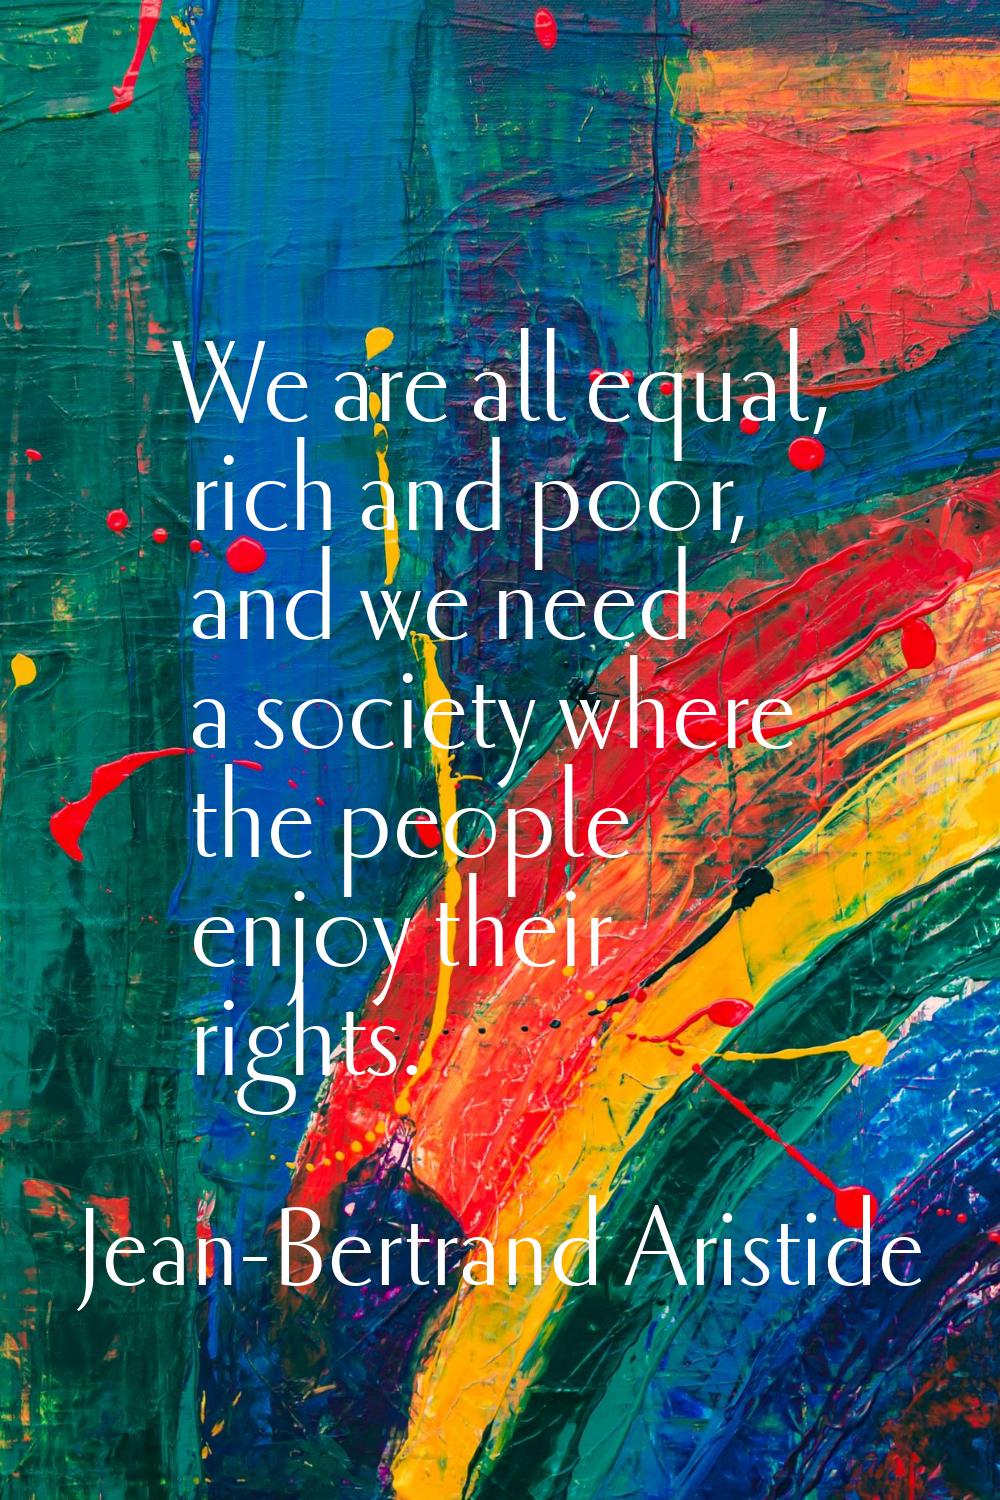 We are all equal, rich and poor, and we need a society where the people enjoy their rights.